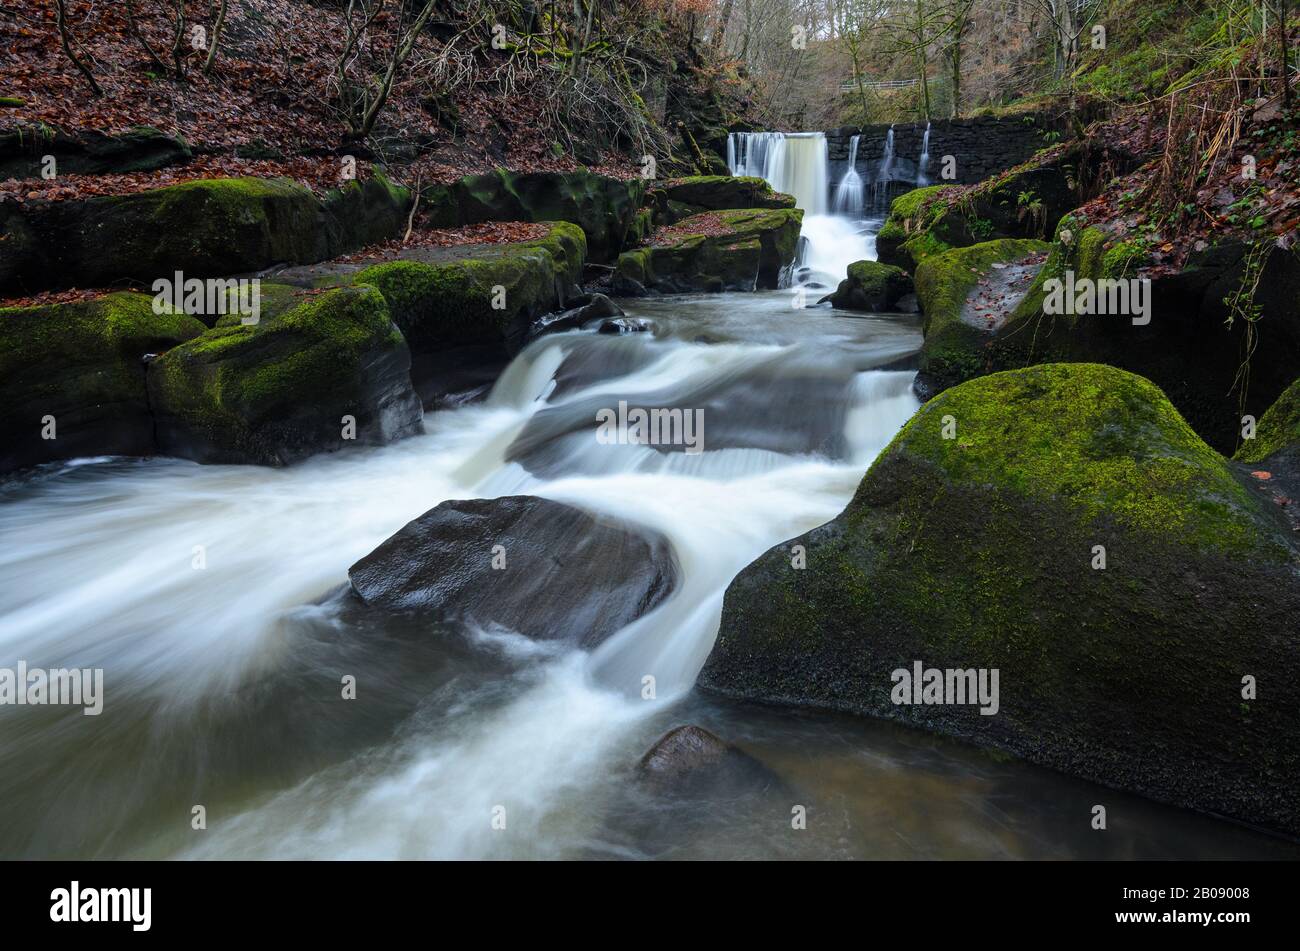 Waterfall in the River Spodden in Healey Dell Nature Reserve in Rochdale,Lancashire, England, United Kingdom. Stock Photo